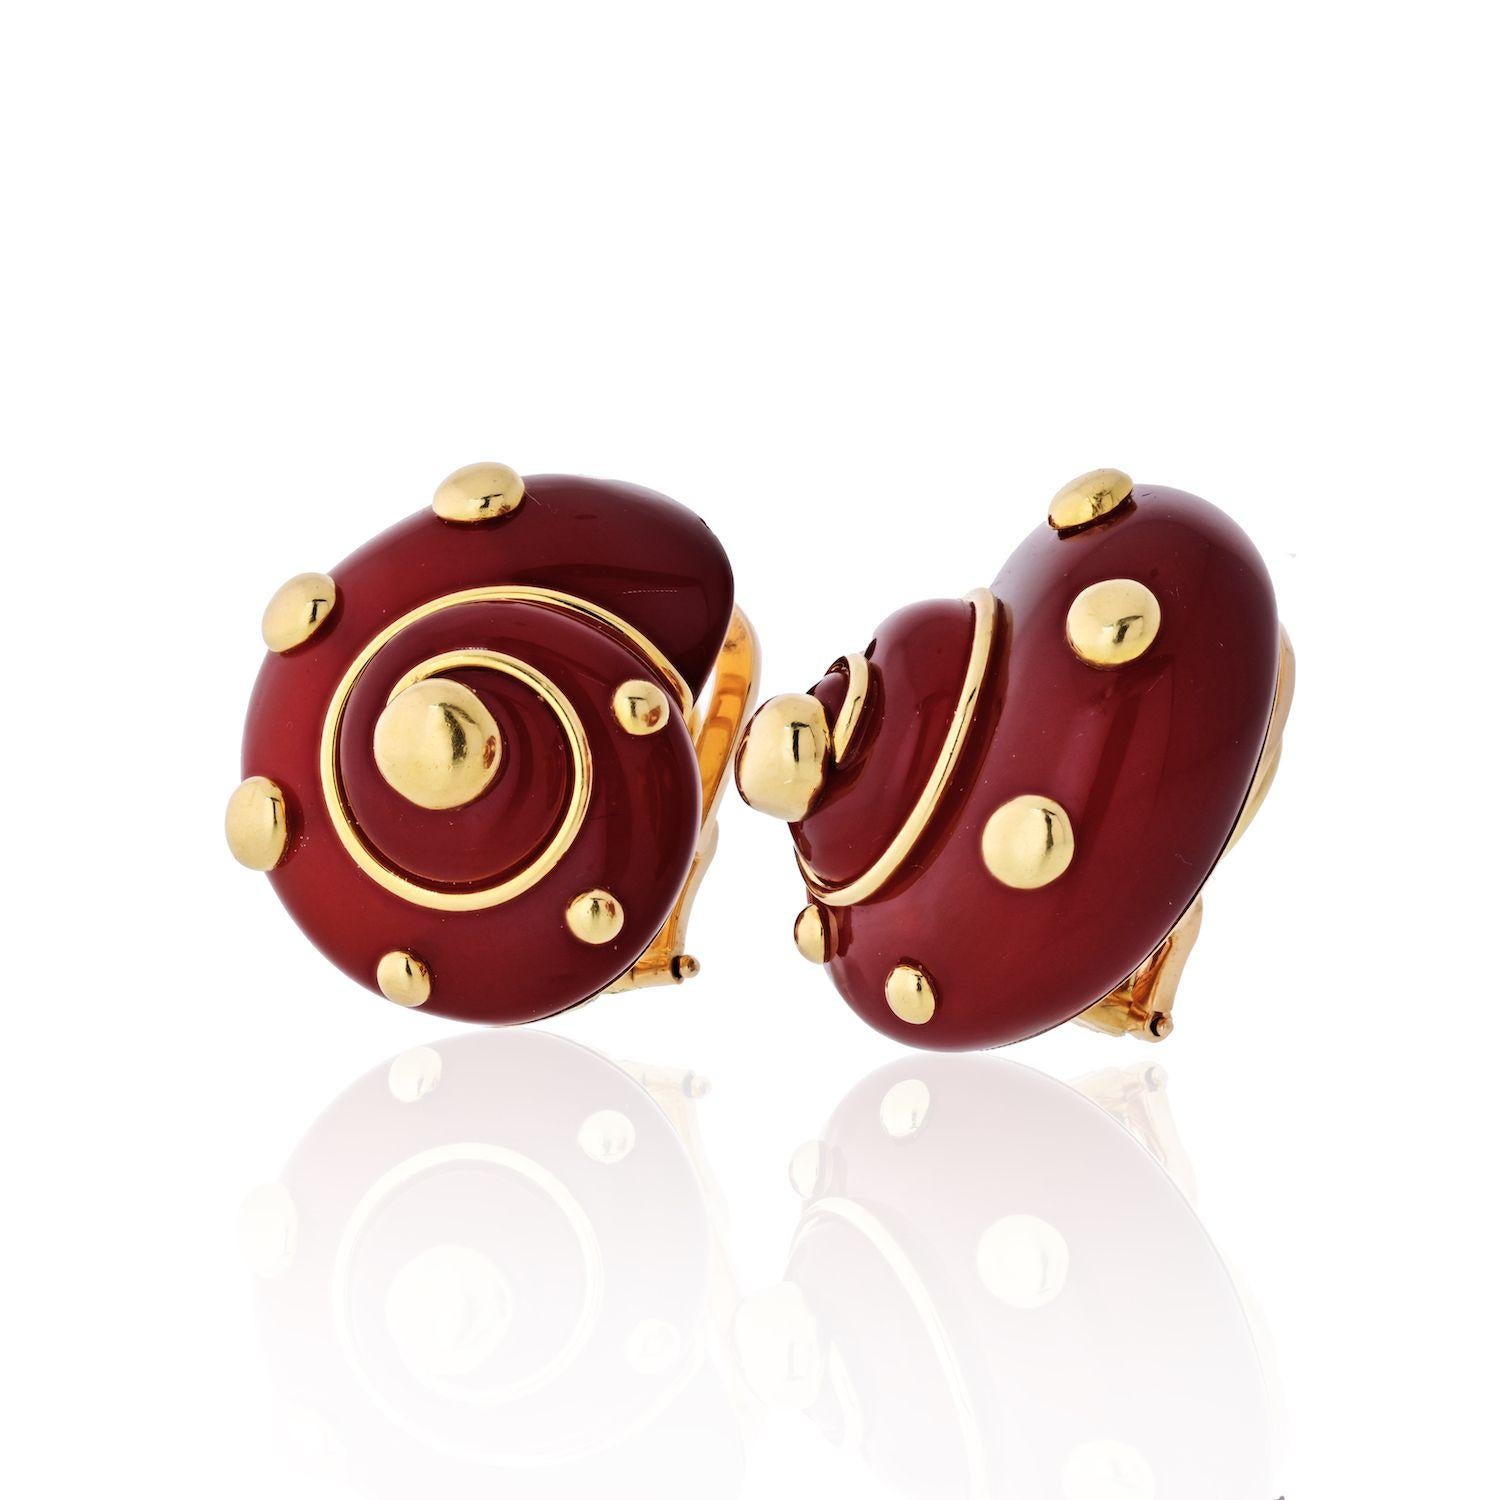 Each earring designed as a carnelian shell with gold accents these will be recognized by high jewelry lovers wherever you go. Verdura's famous design style shows that you are a sophisticated jewelry collector. 
STONES: 2 carnelian shells
SIGNATURE: